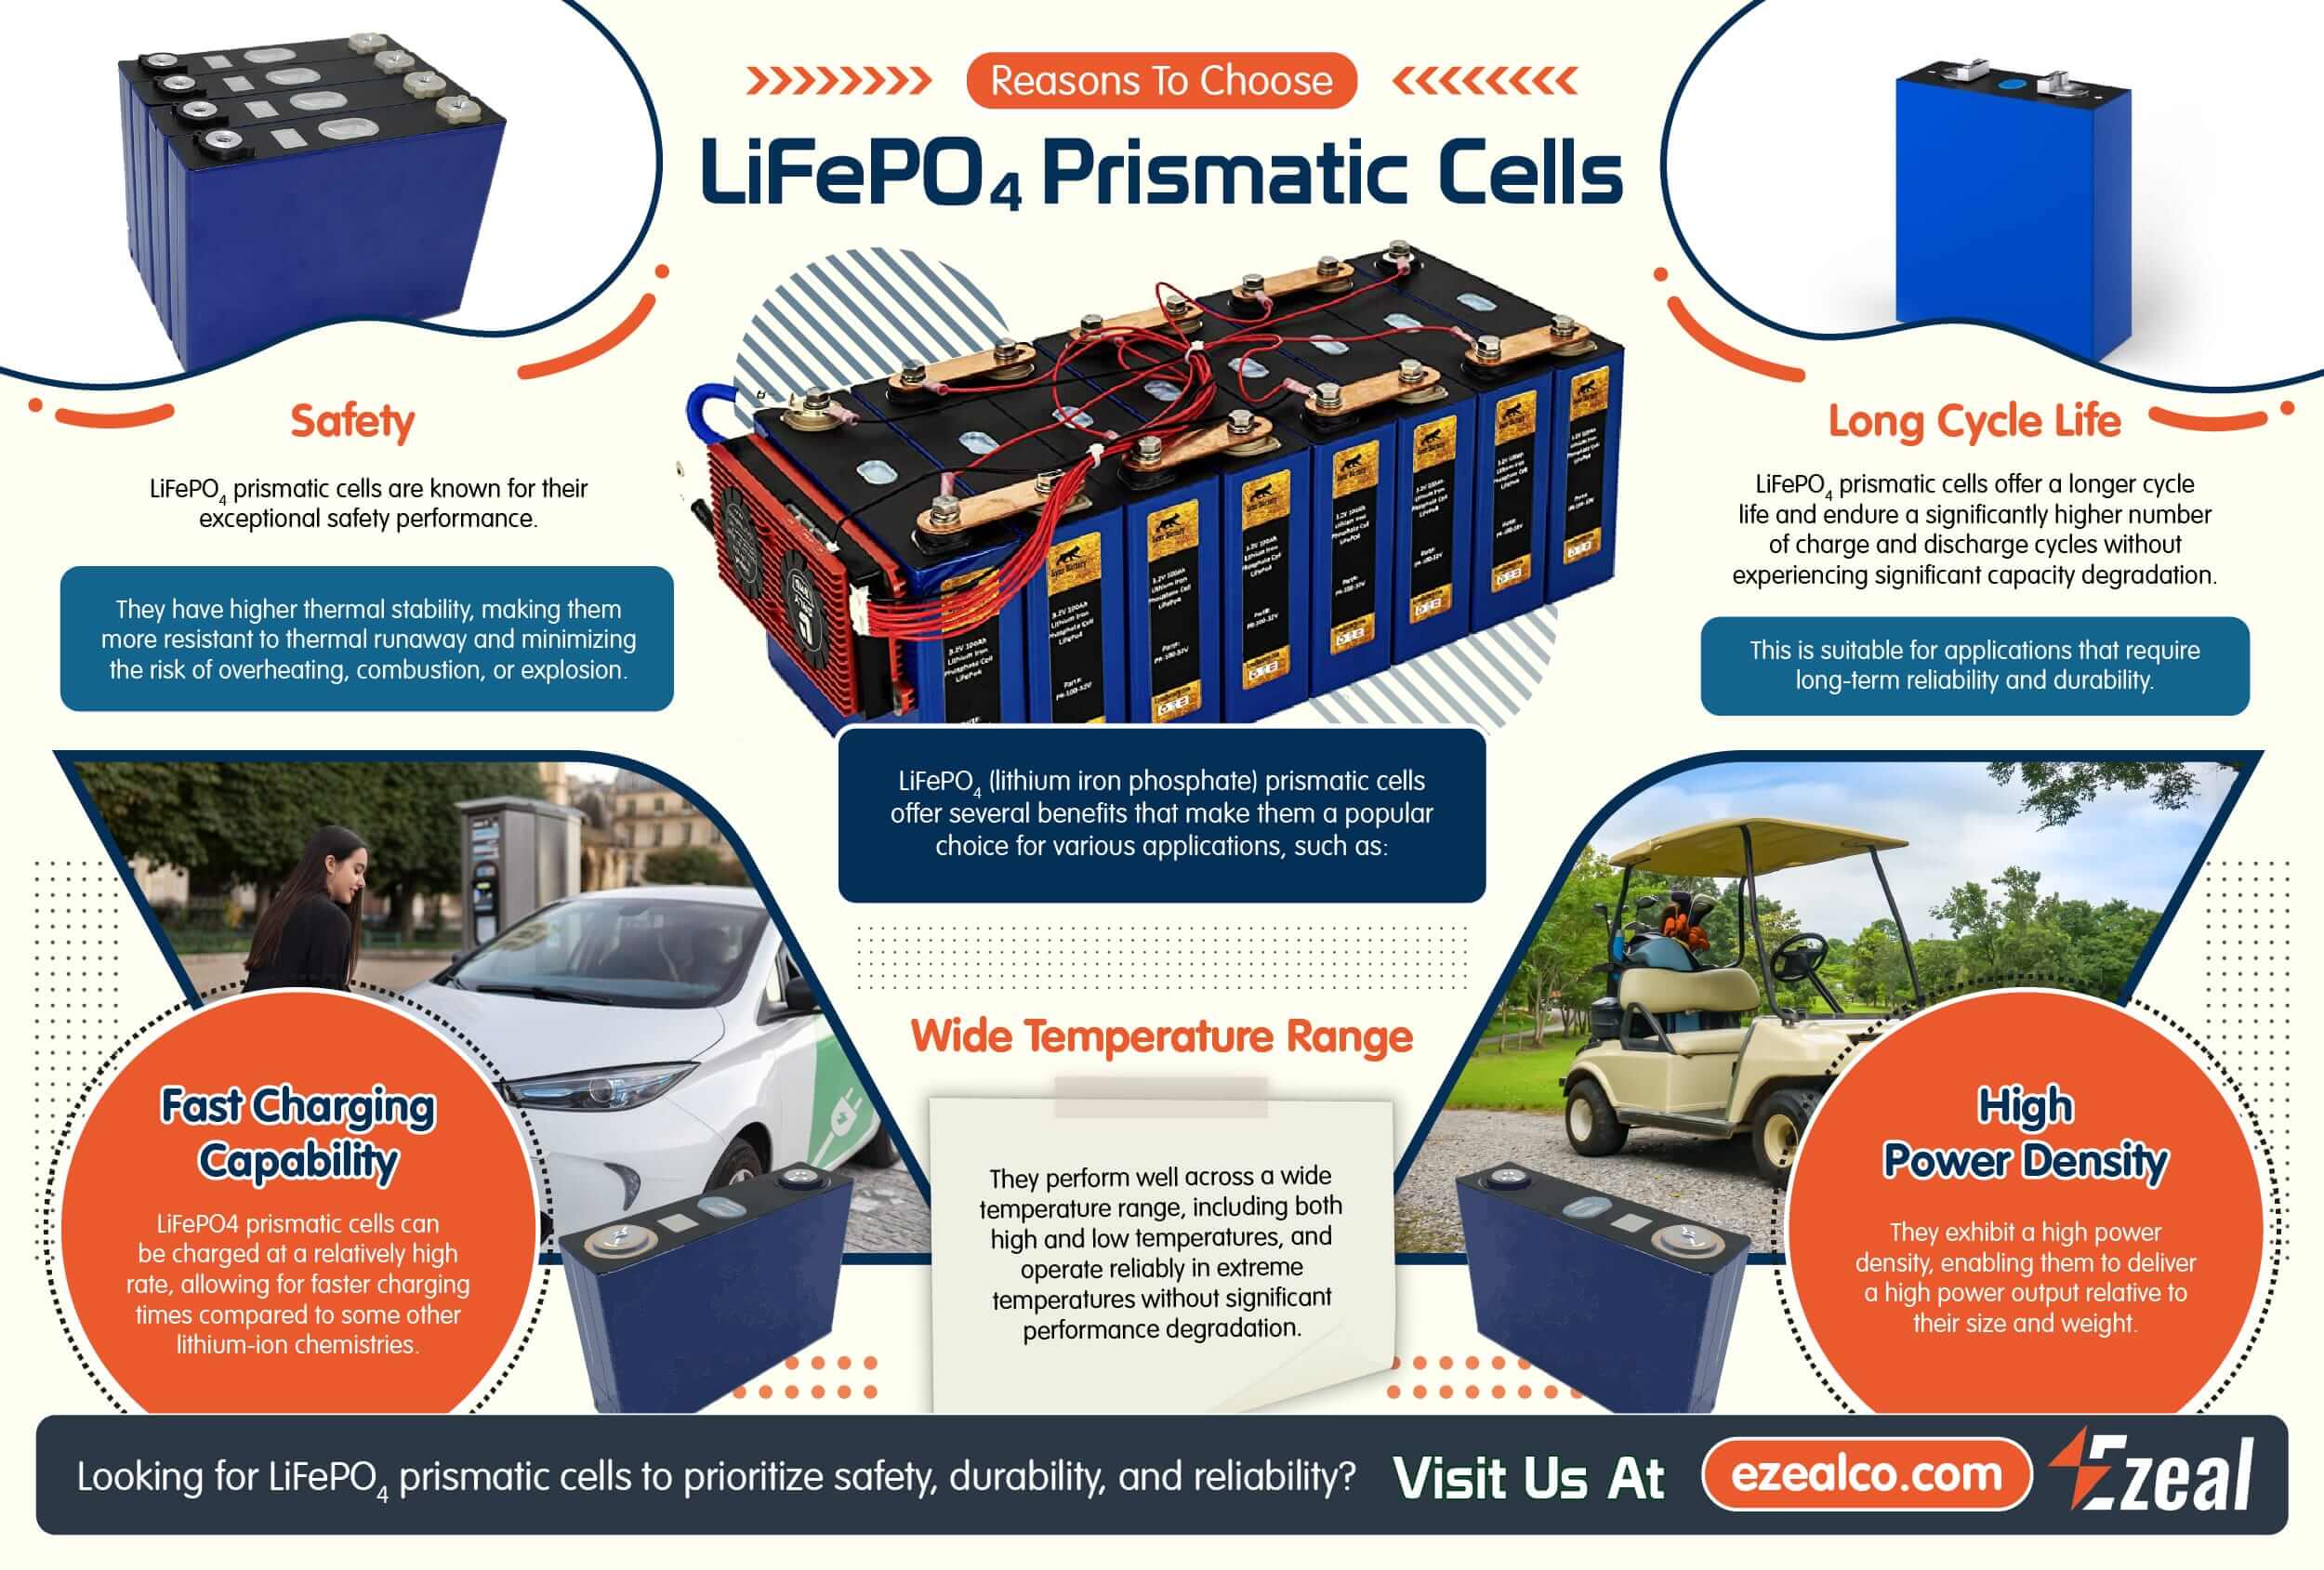 Reasons to choose LifePO4 Prismatic Cells